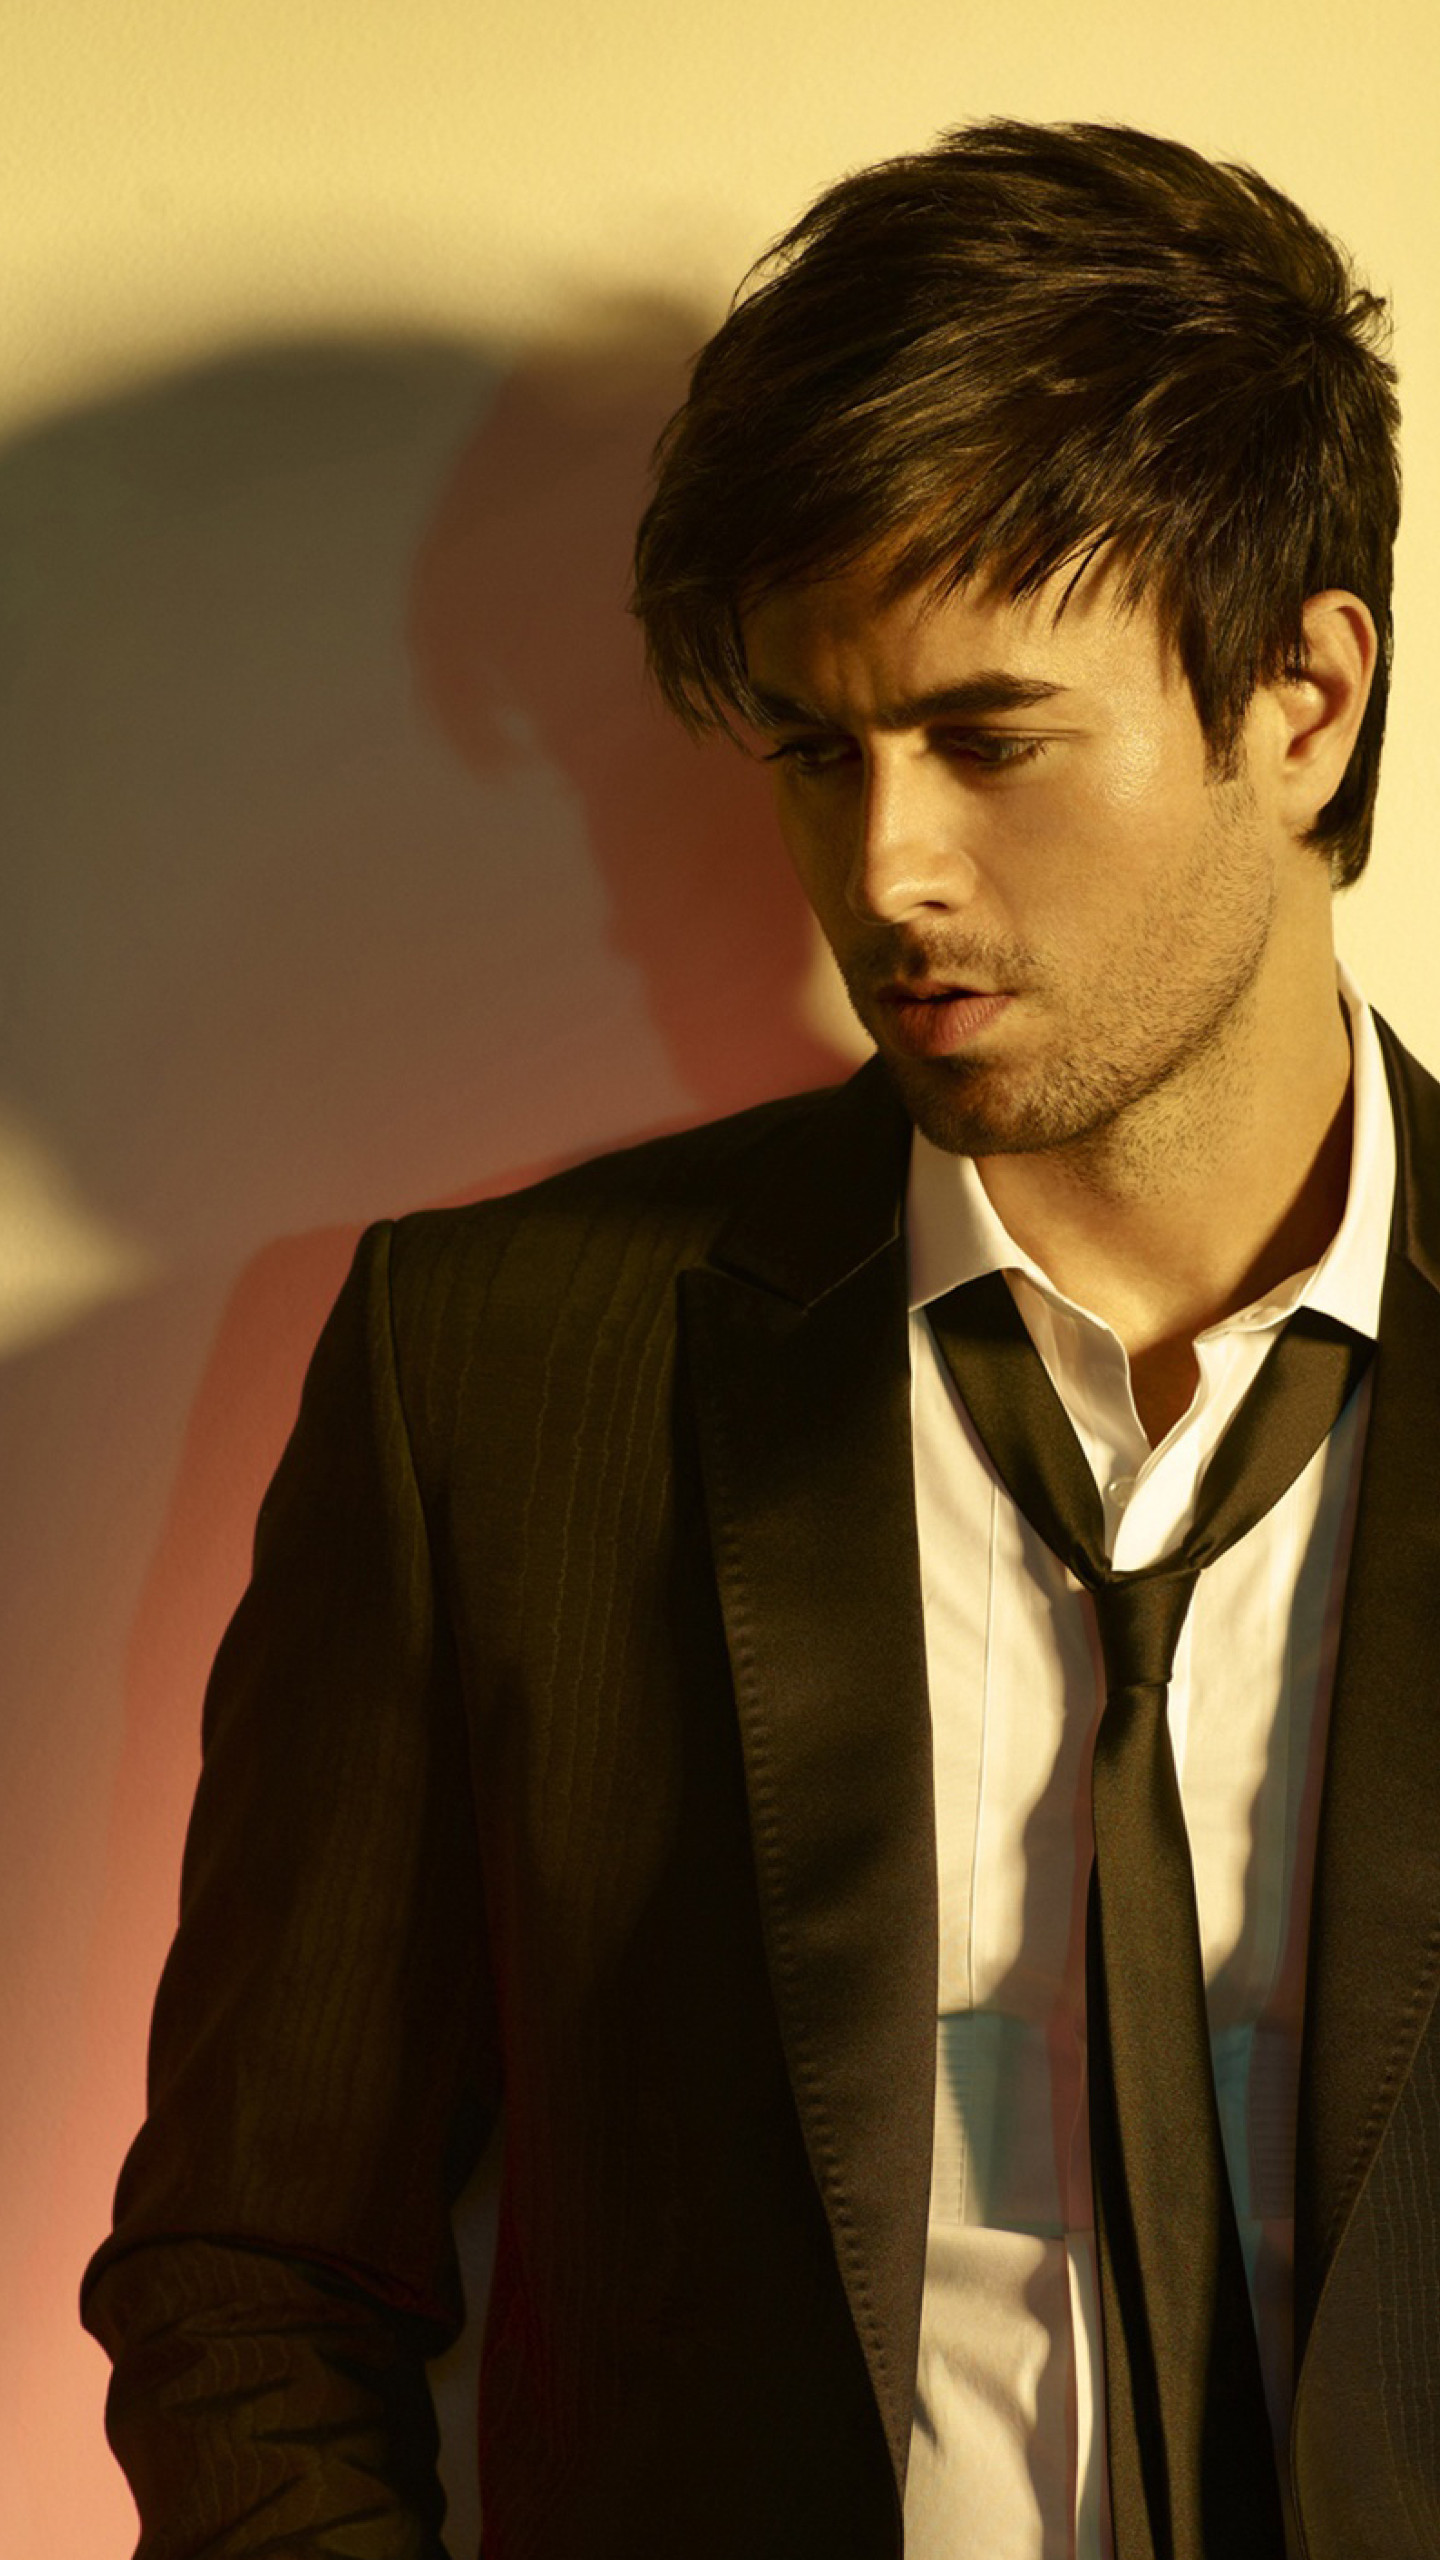 enrique iglesias wallpaper,hair,suit,hairstyle,forehead,chin